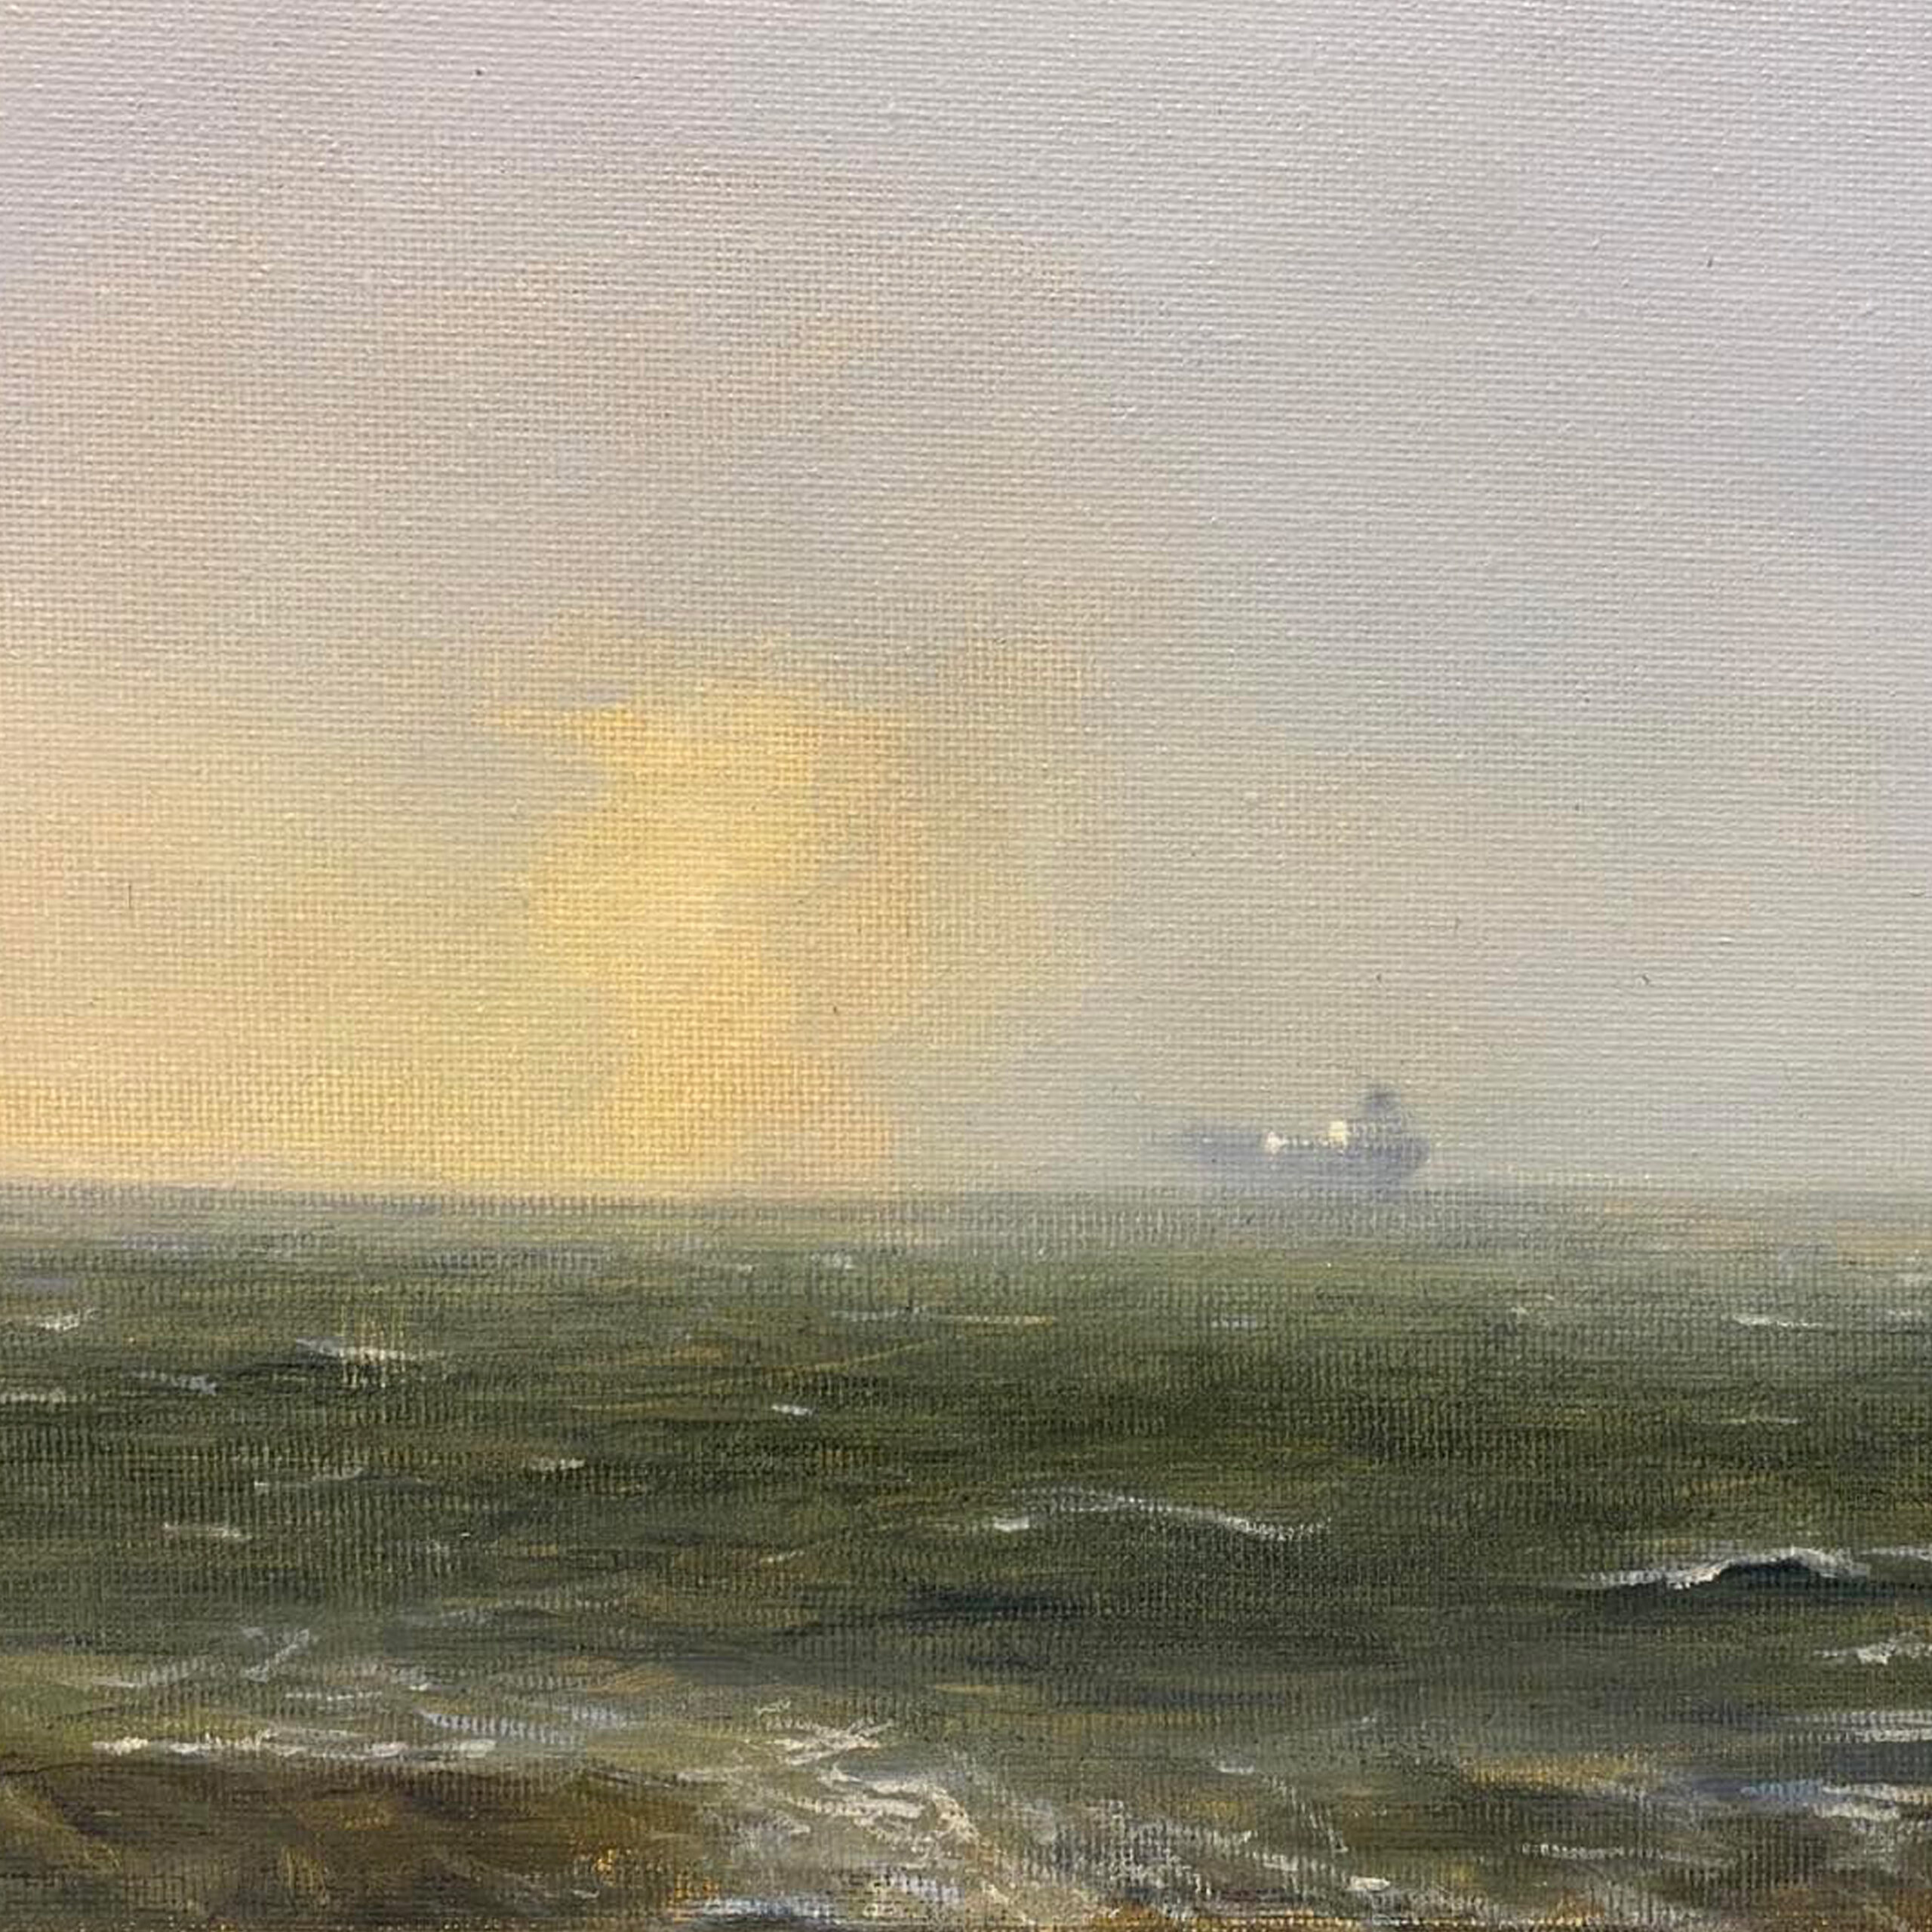 Painting by Jon Challen, stormy dark green ocean, sunlight through clouds and ship on the horizon.